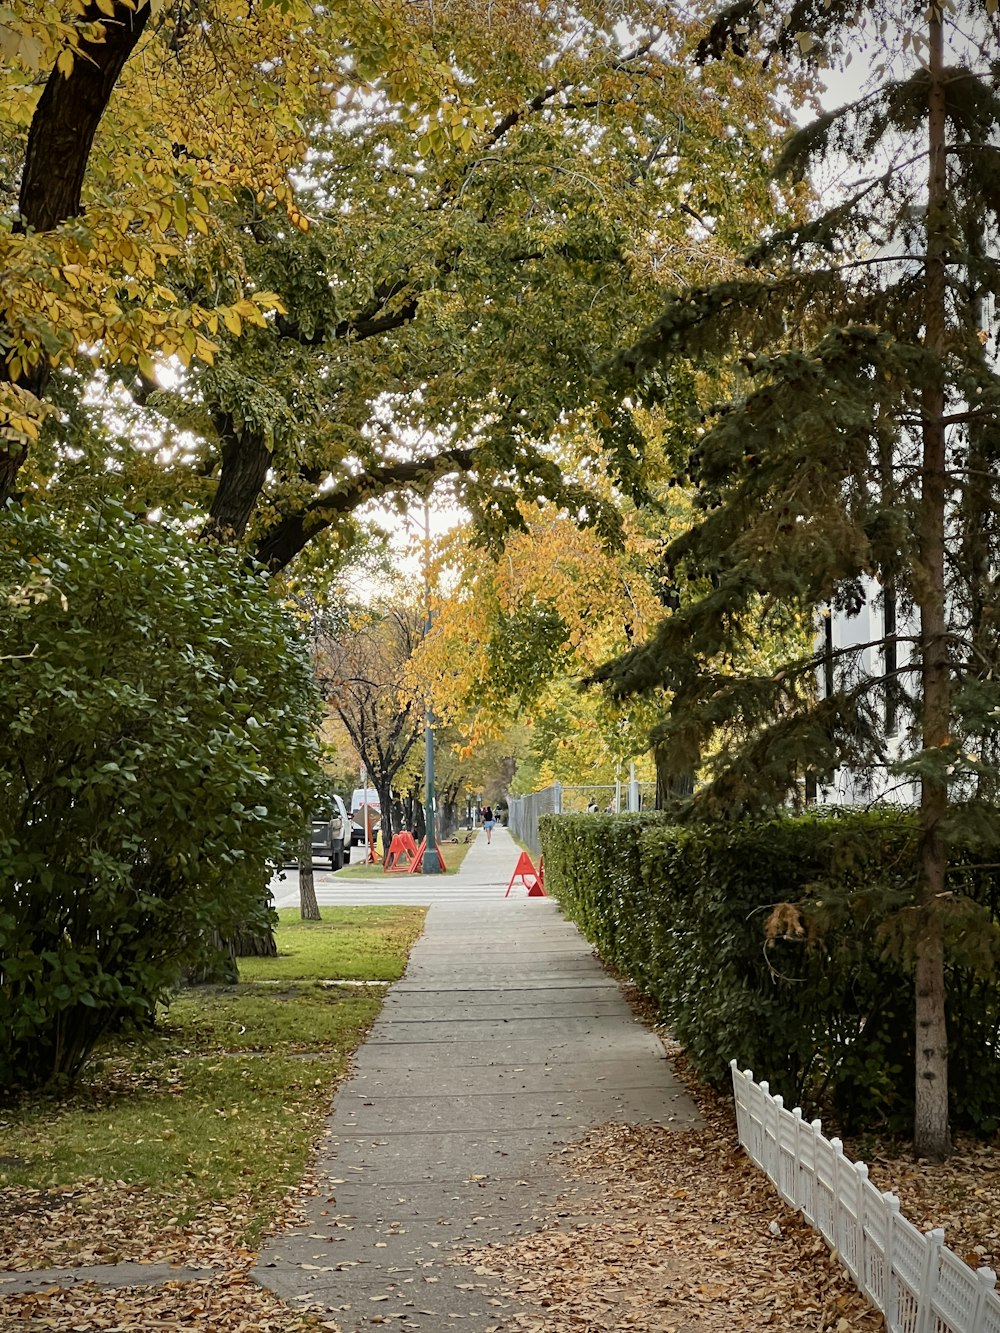 a walkway in a park with trees and leaves